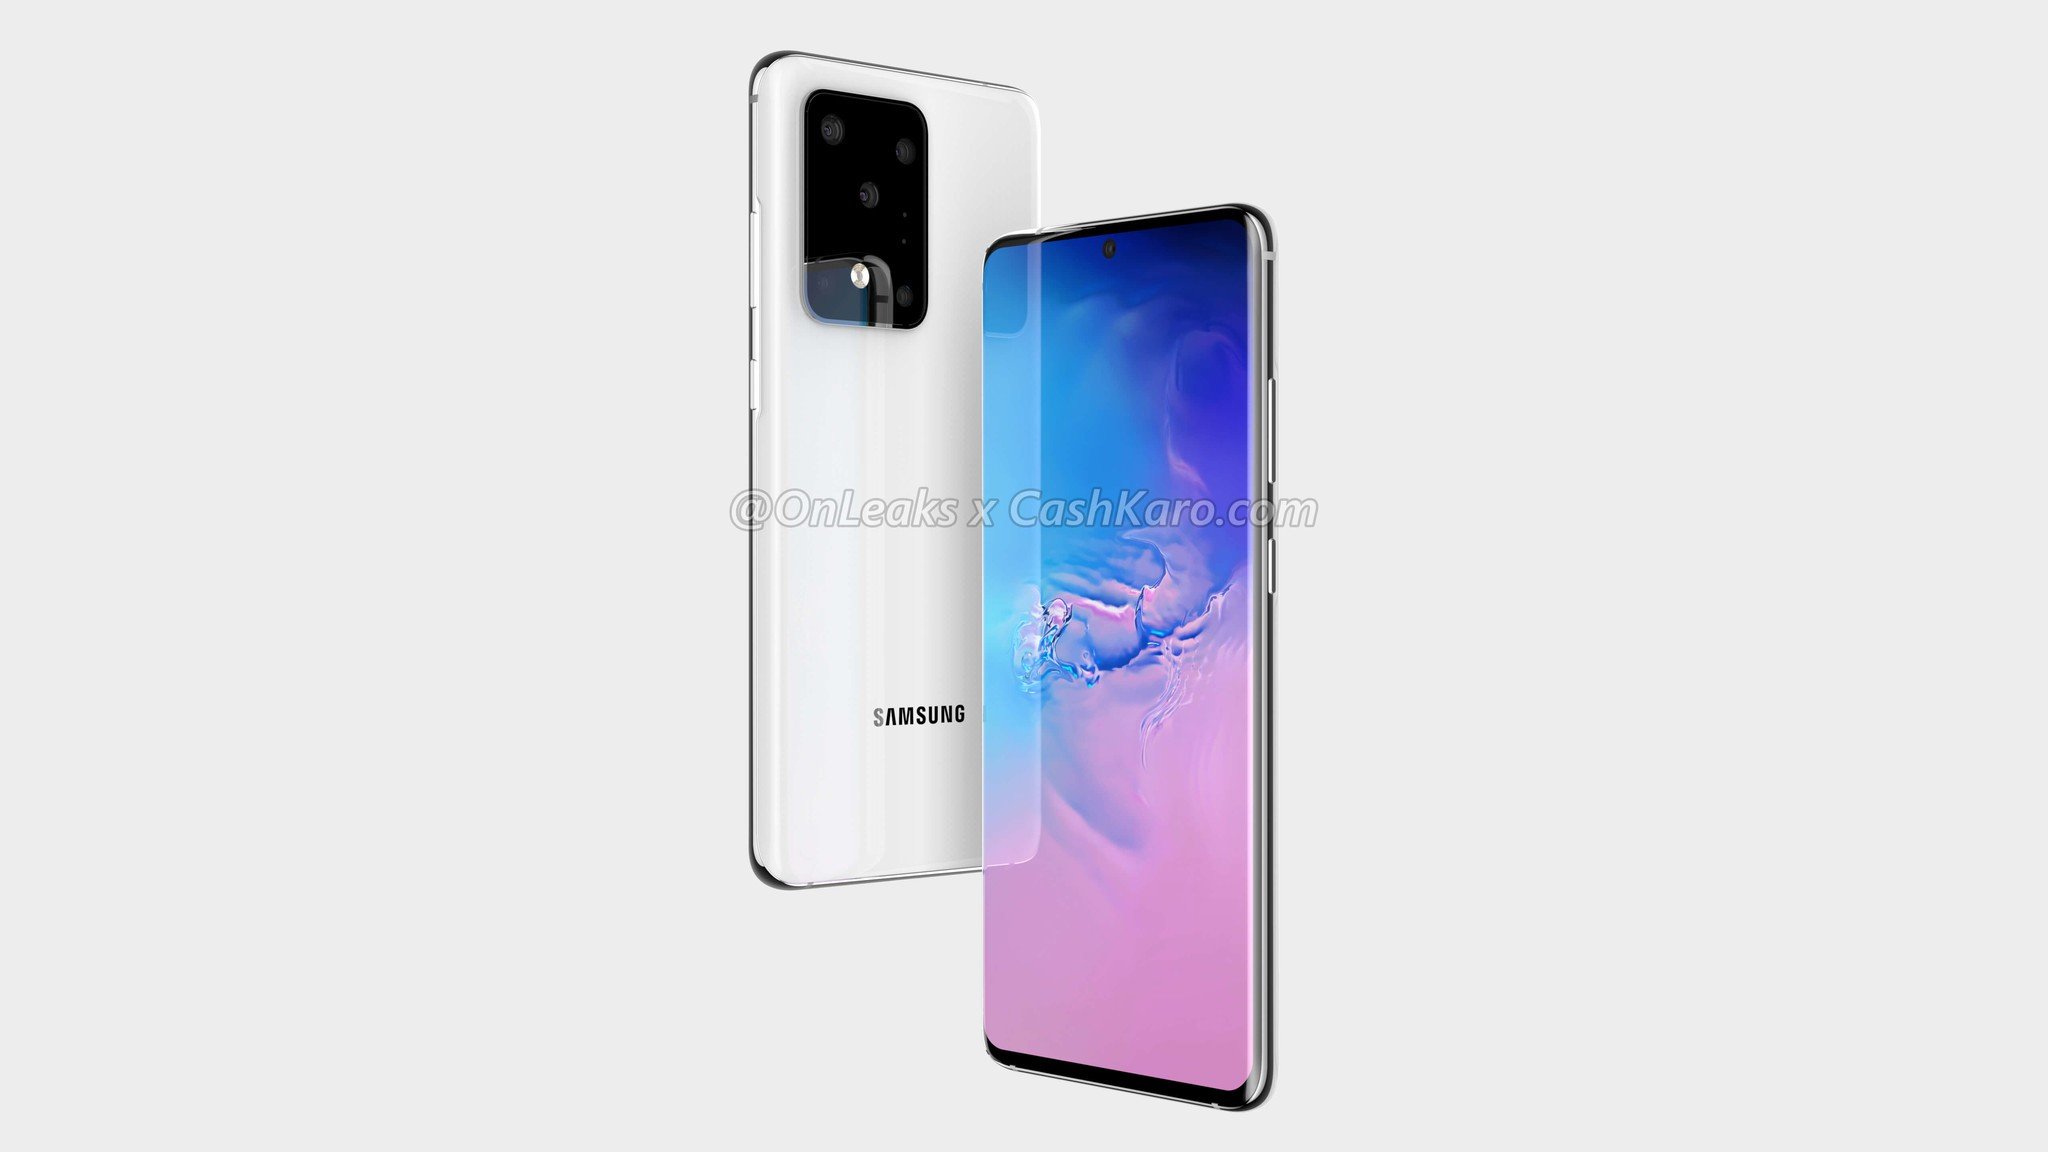 https://www.androidcentral.com/sites/androidcentral.com/files/styles/large/public/article_images/2019/11/galaxy-s11-plus-leak-3.jpg?itok=0IMJGnYV